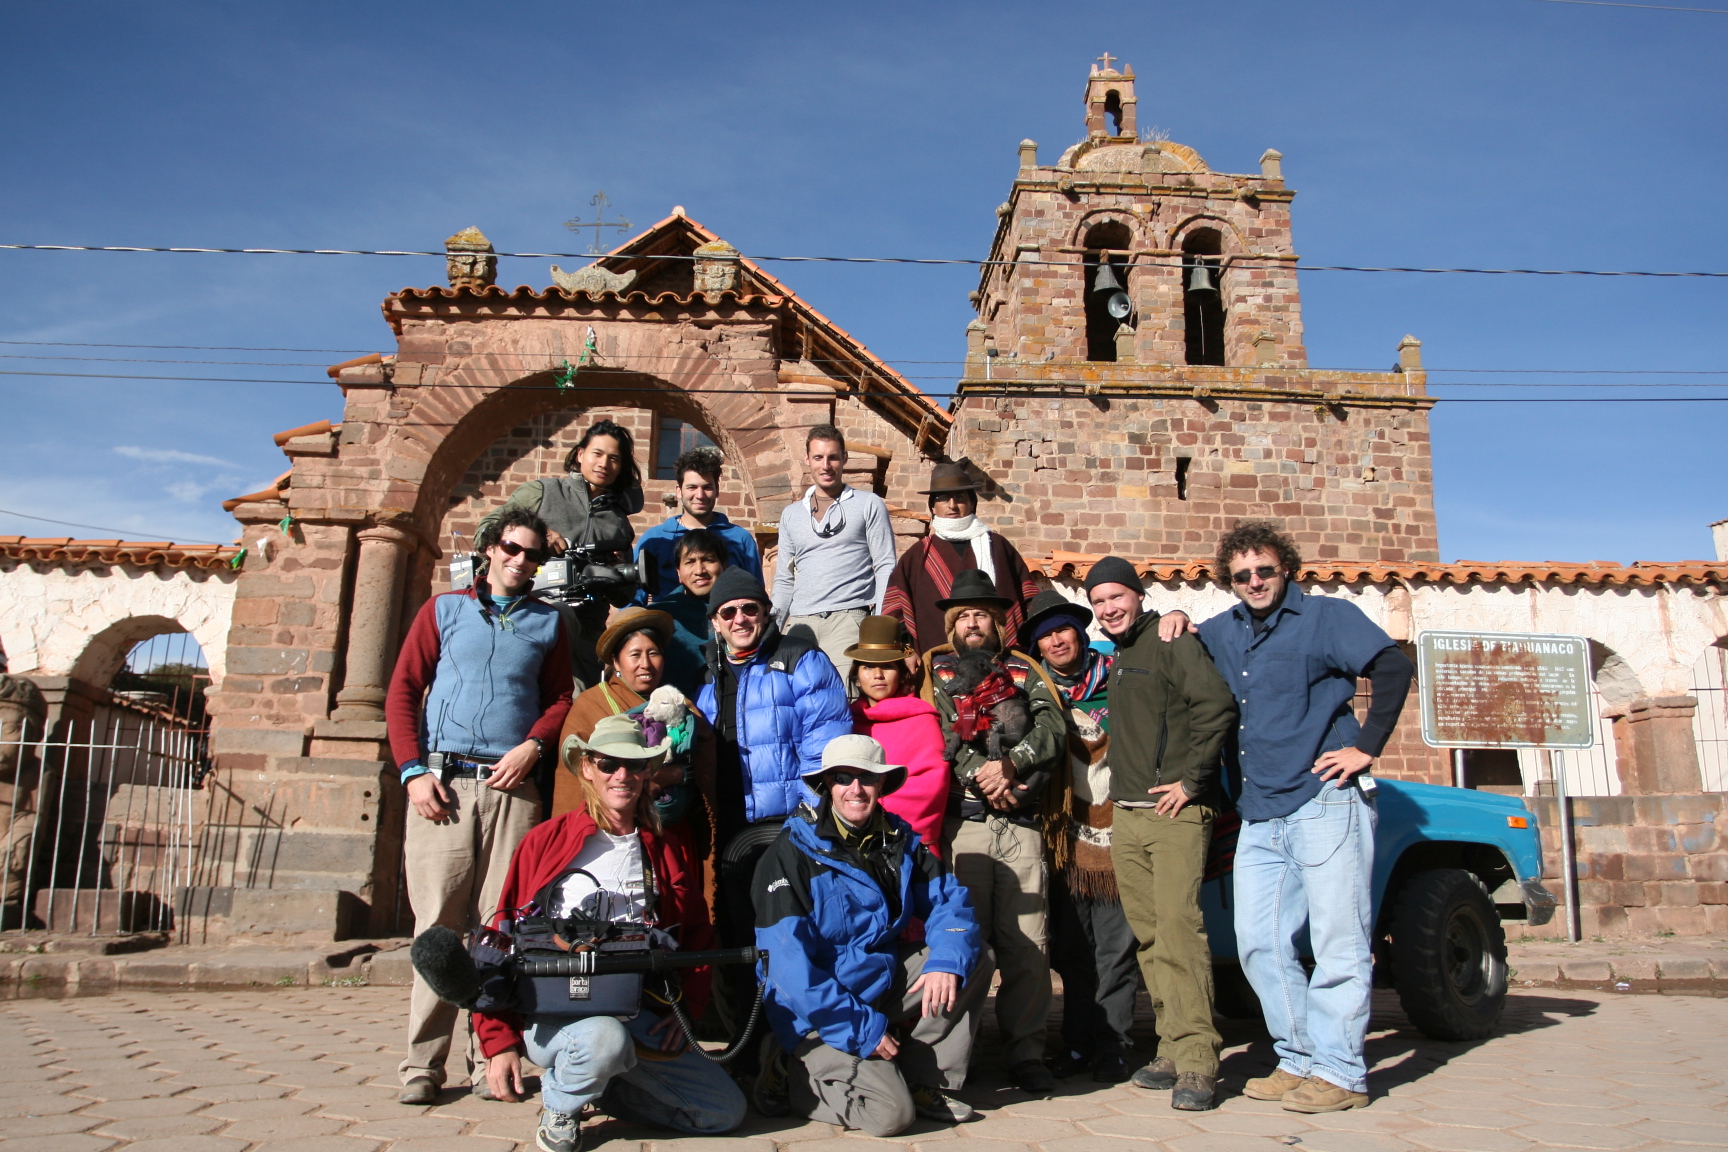 TV director Ian Stevenson (center, wearing blue parker) directs The Discovery Channel's 'Bone Detective'. Location: Bolivia. More at www.ianstevenson.tv